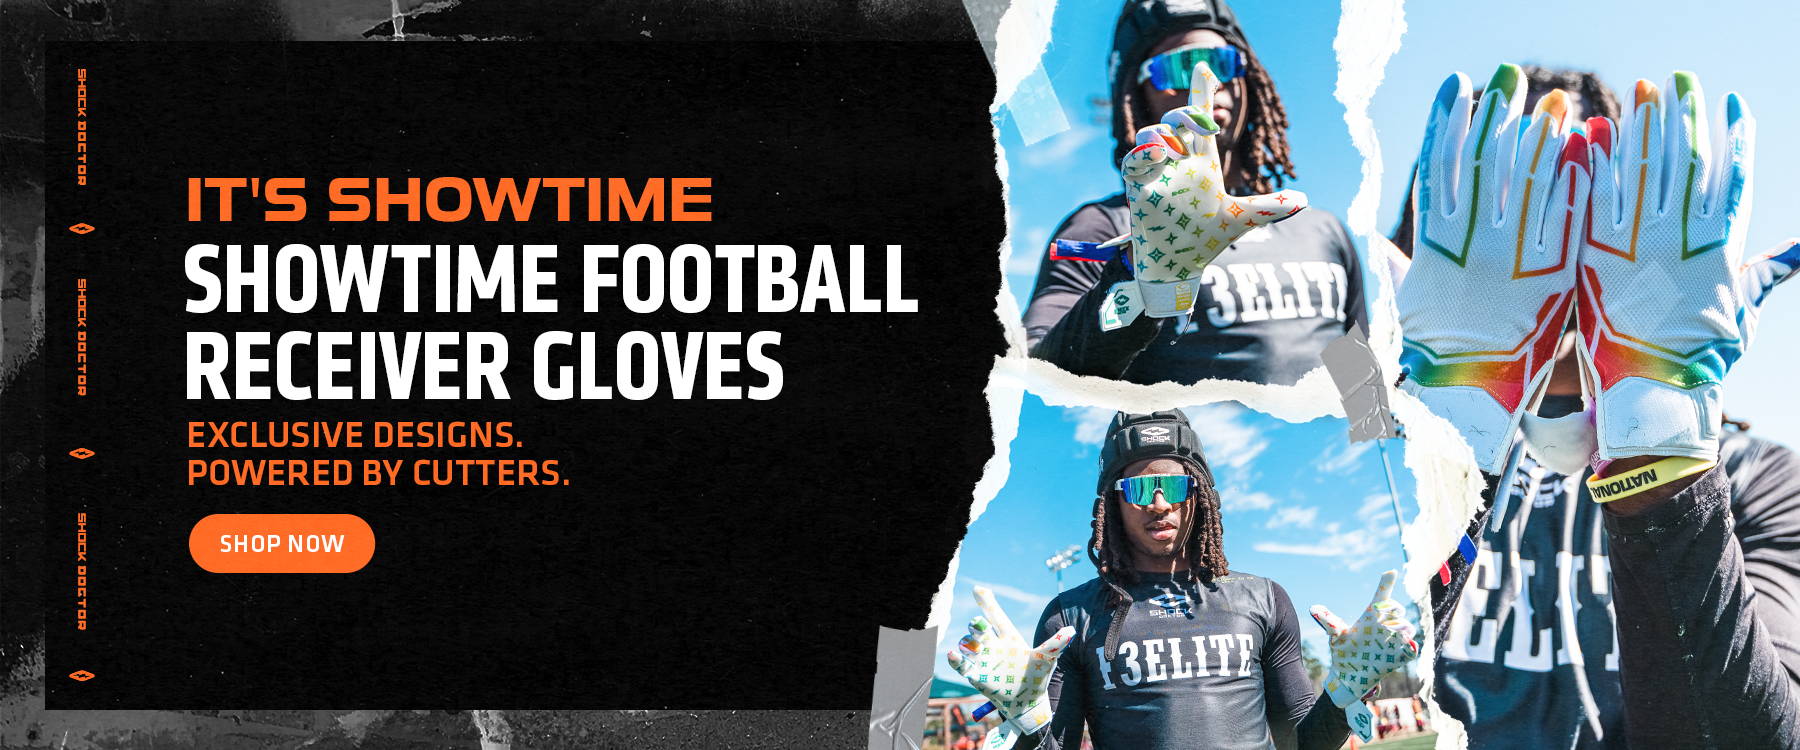 It's Showtime. Showtime Football Receiver Gloves. 